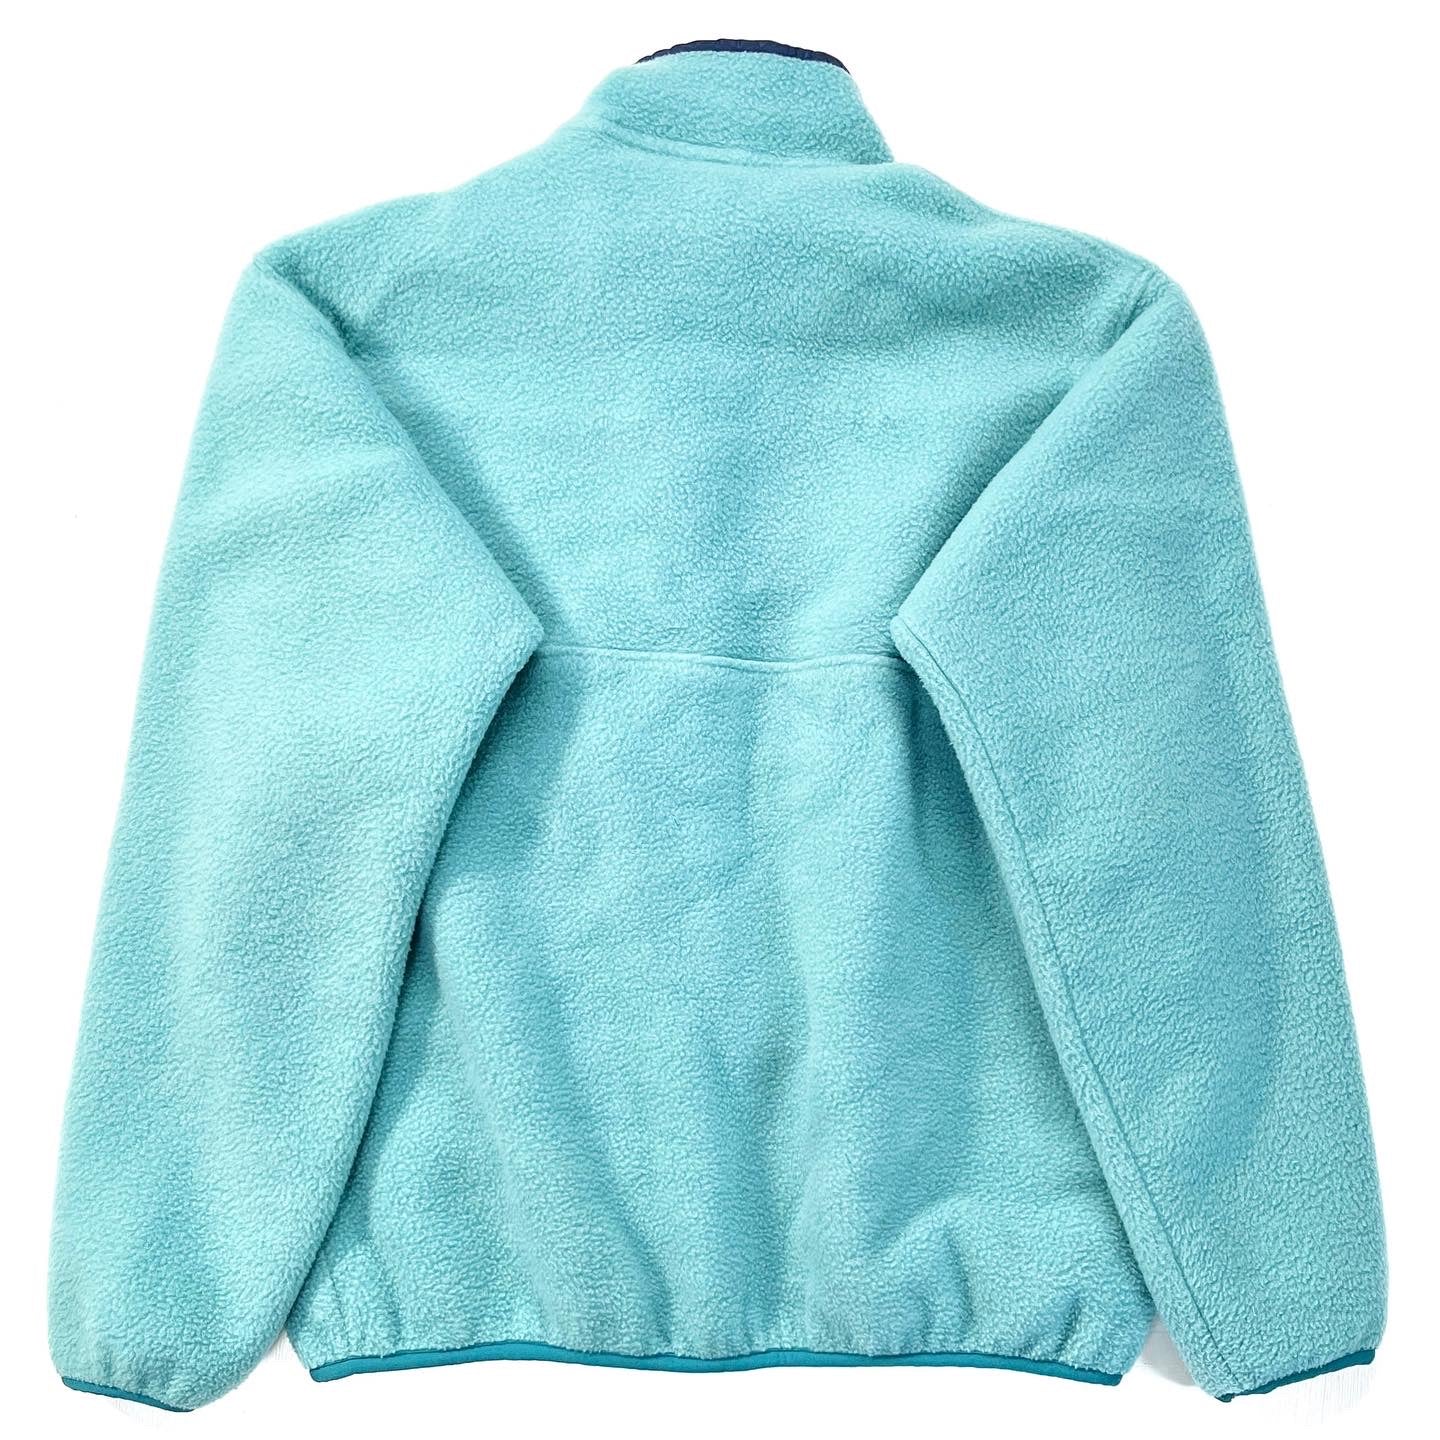 1993 Patagonia Synchilla Snap-T, Sea Green & Ink Blue (L)